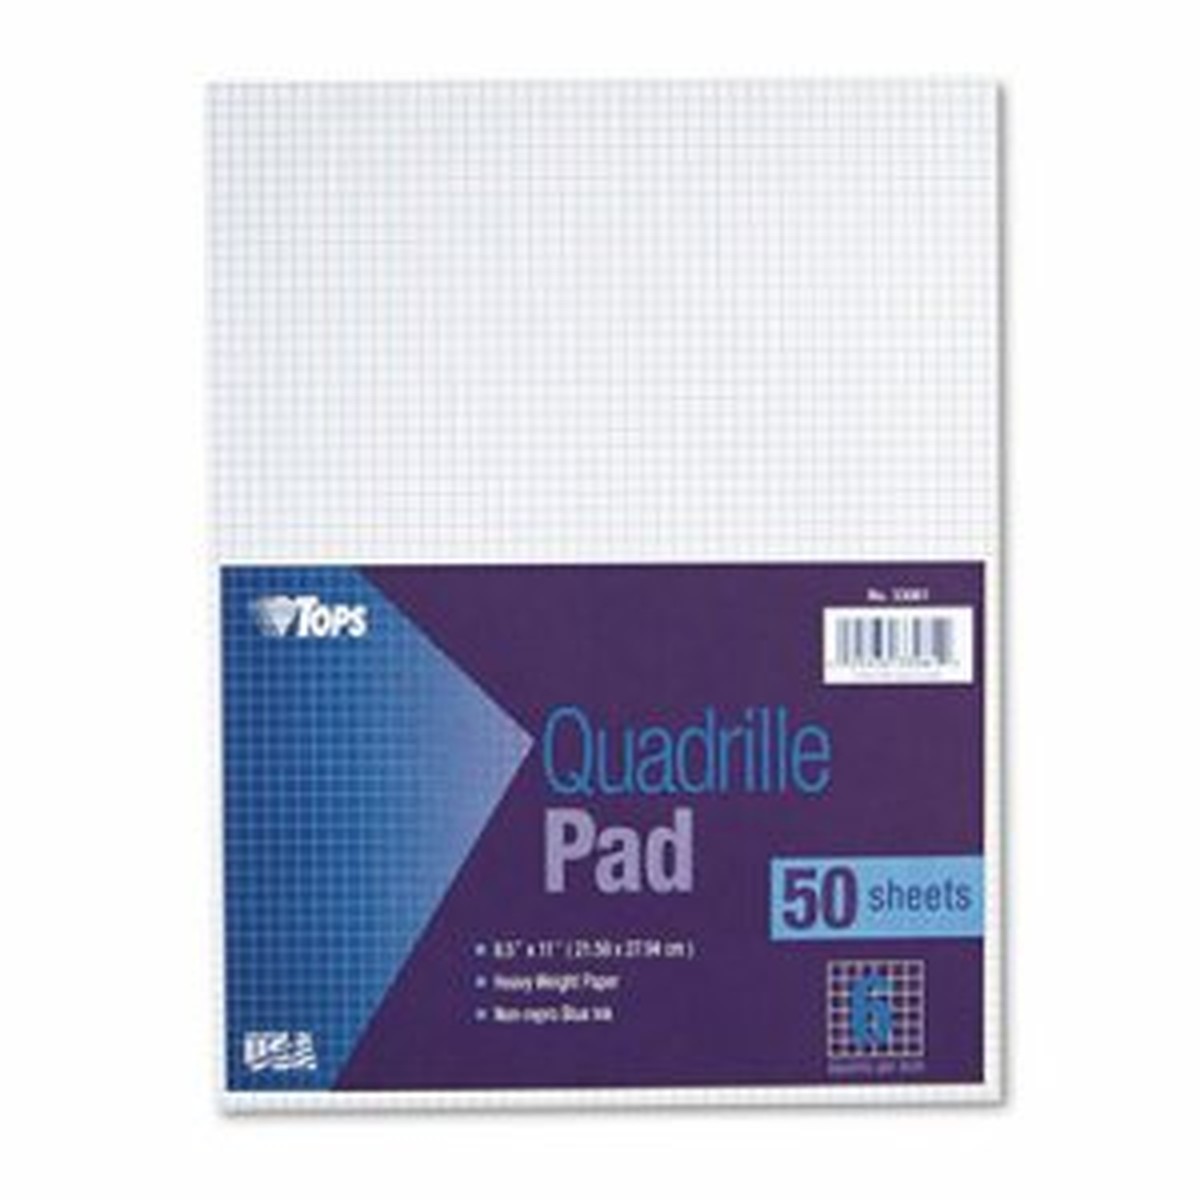 Quadrille Pads, 6 Squares/Inch, 8 1/2 x 11, White, 50 Sheets